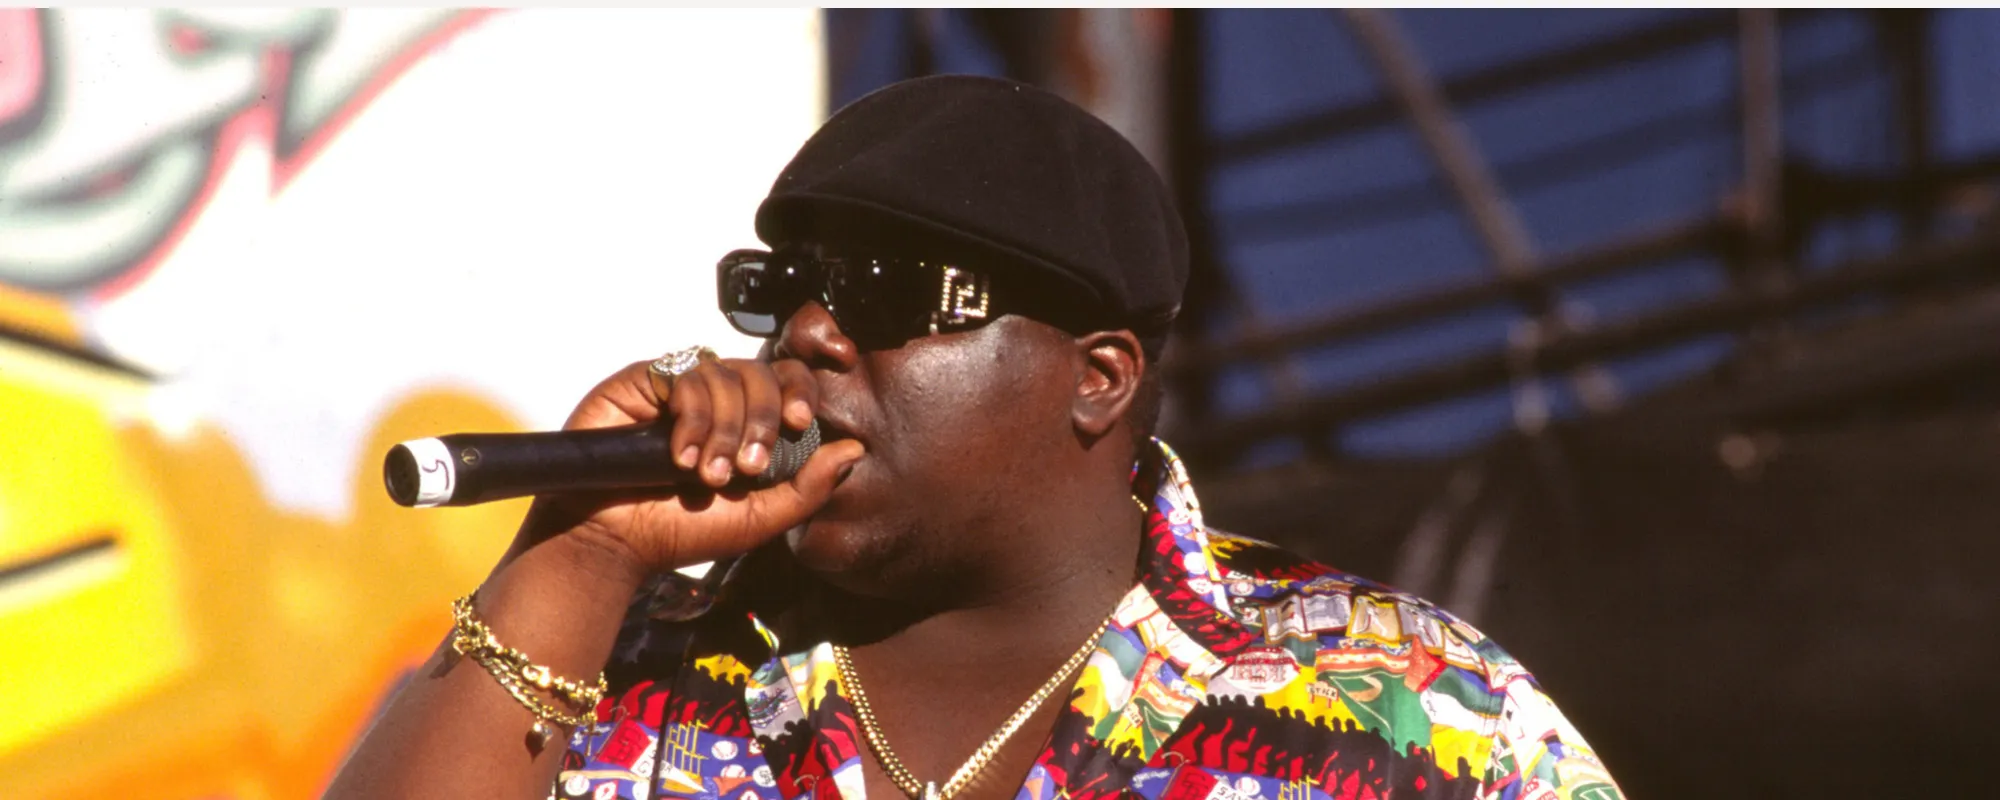 25 Biggie Smalls Quotes and Lyrics about Life and Death (2022)